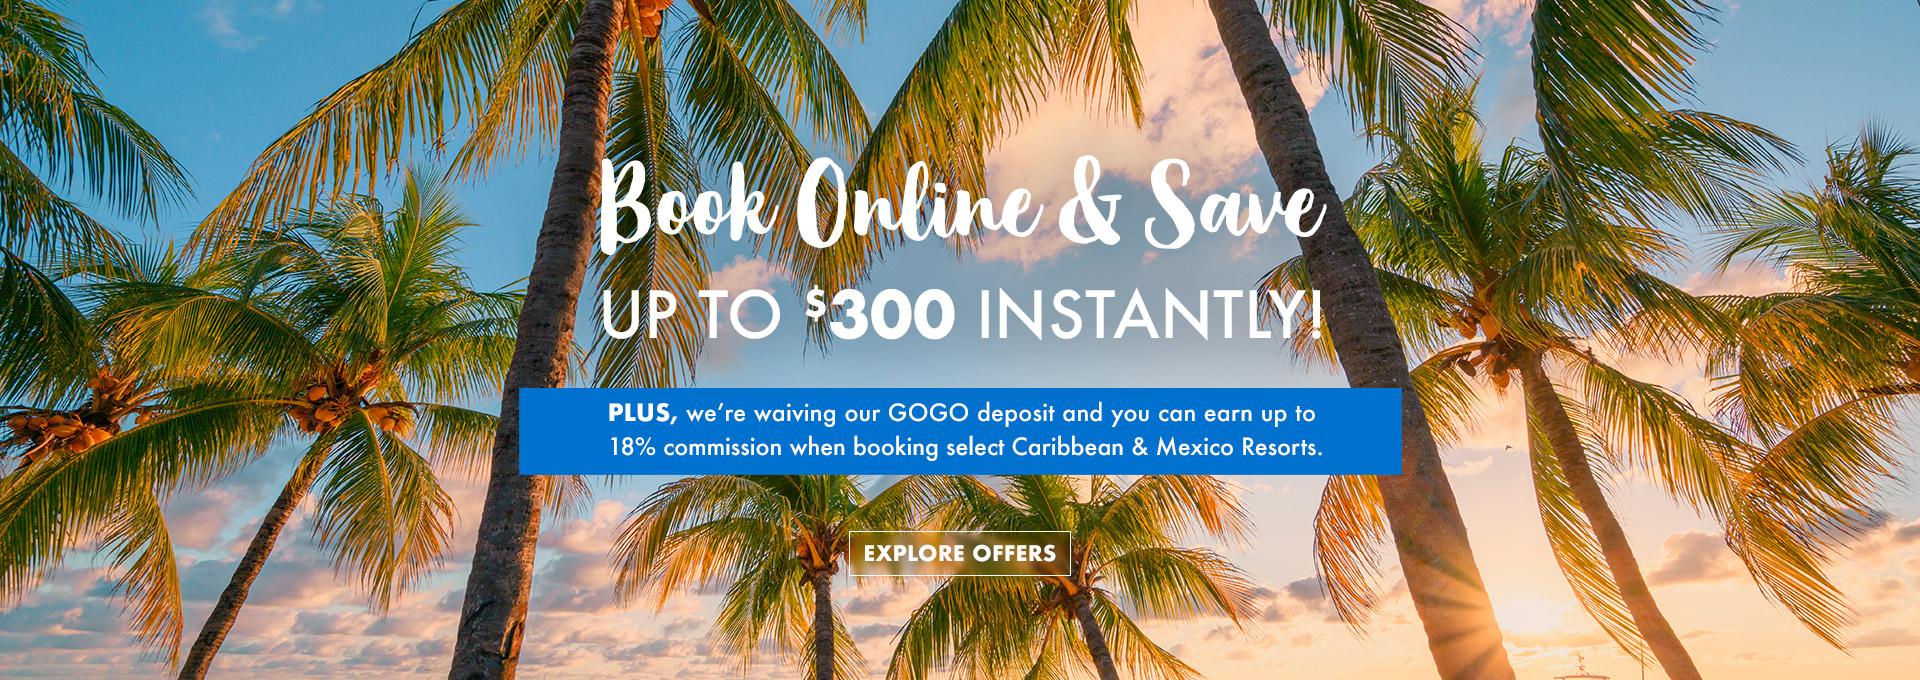 Book online and save up to $300 instantly